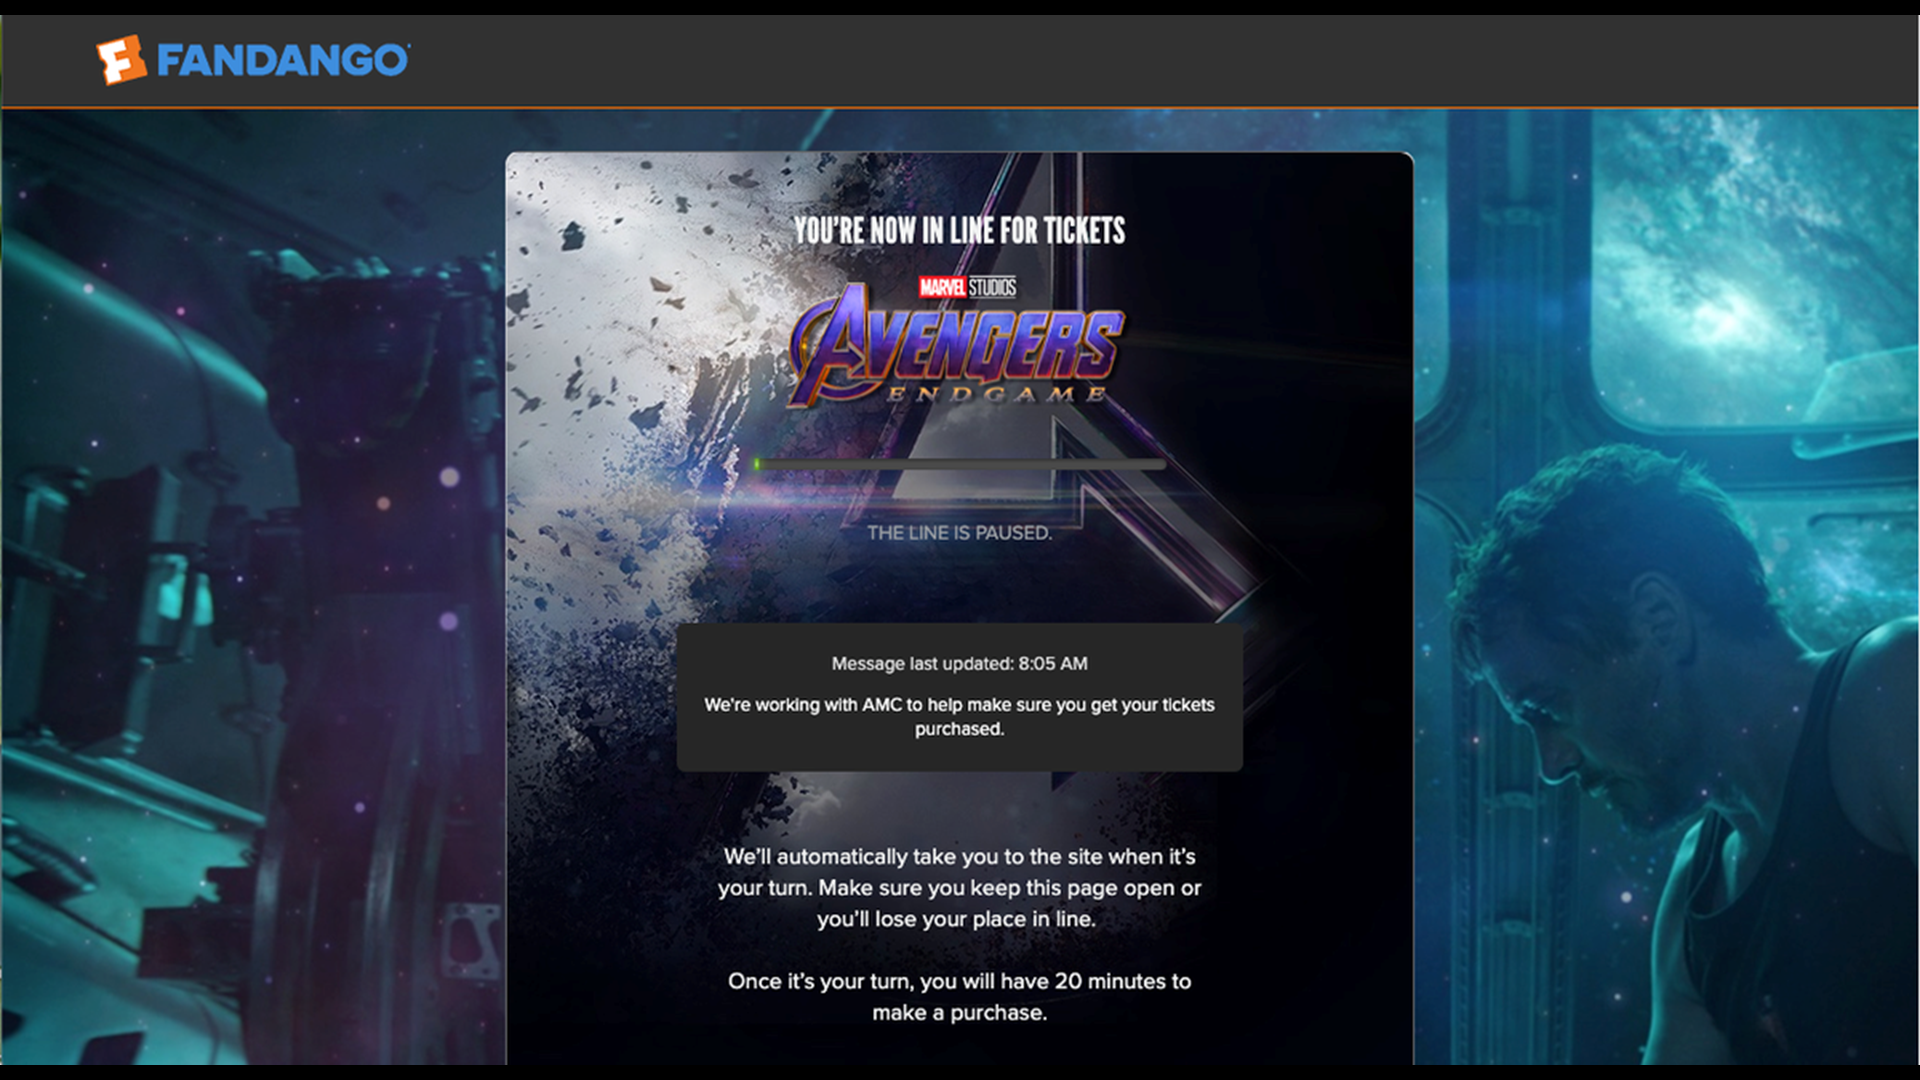 Within an hour of the 'Avengers: Endgame' tickets going on sale Tuesday, the AMC website temporarily shut down, and Fandago put users on pause to handle traffic. Plus more trending stories on Wednesday, April 3, 2019.